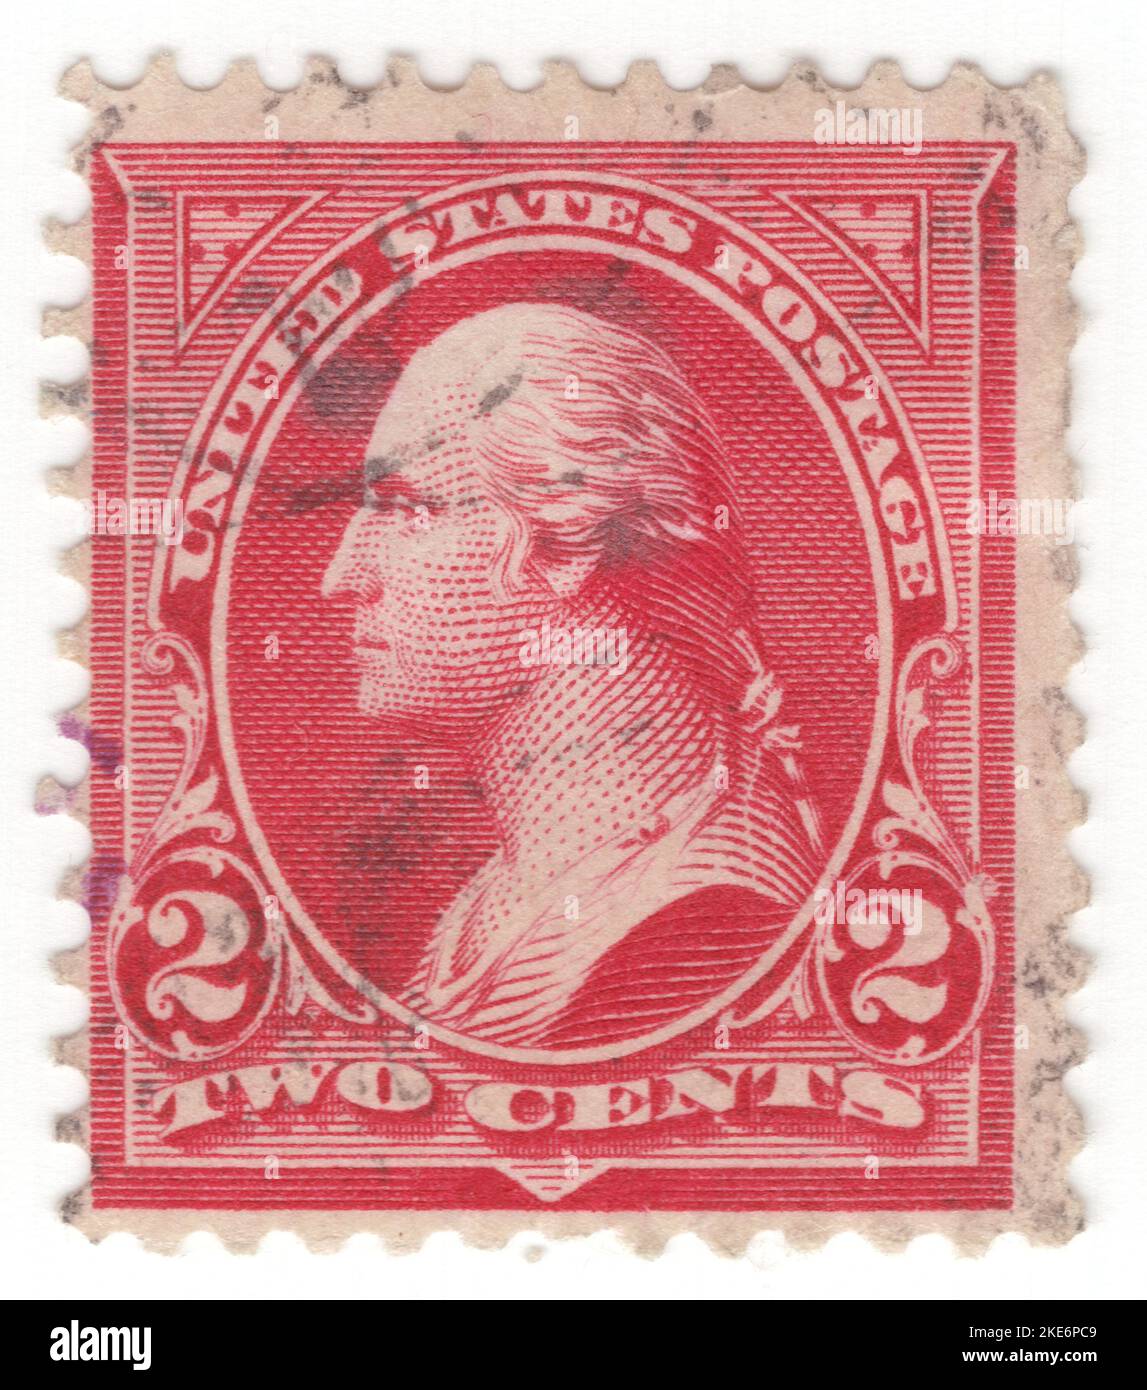 USA - 1899: An 2 cents red postage stamp depicting portrait of George Washington. American military officer, statesman, and Founding Father who served as the first president of the United States from 1789 to 1797. Appointed by the Continental Congress as commander of the Continental Army, Washington led the Patriot forces to victory in the American Revolutionary War and served as the president of the Constitutional Convention of 1787, which created the Constitution of the United States and the American federal government. Washington has been called the 'Father of his Country' Stock Photo